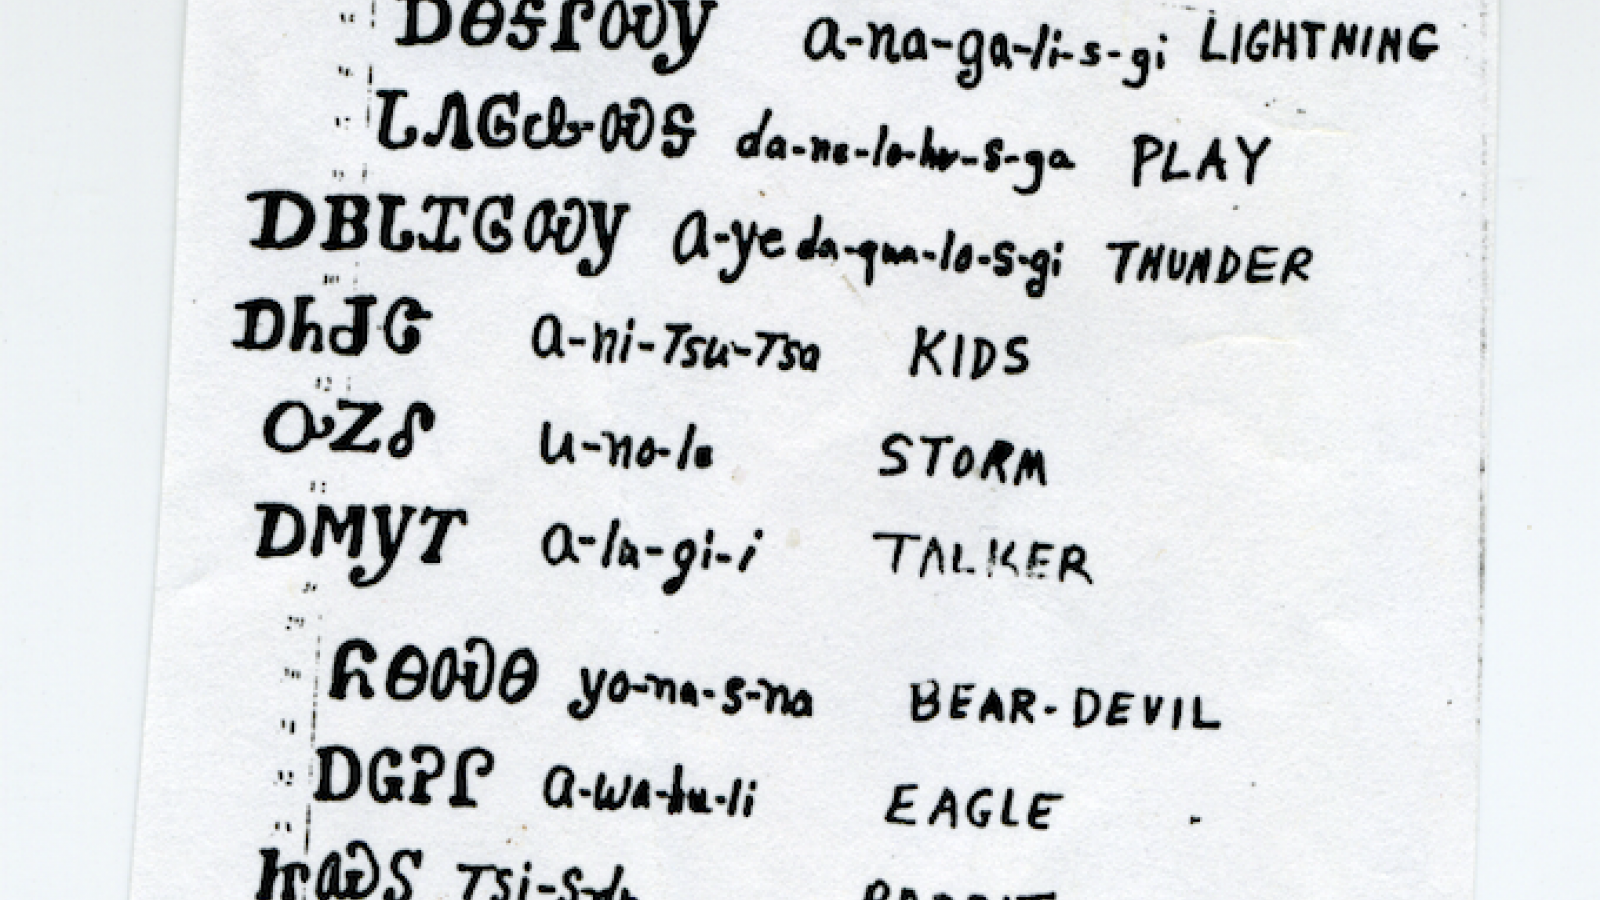 List of Cherokee words, their pronunciation, and English translations